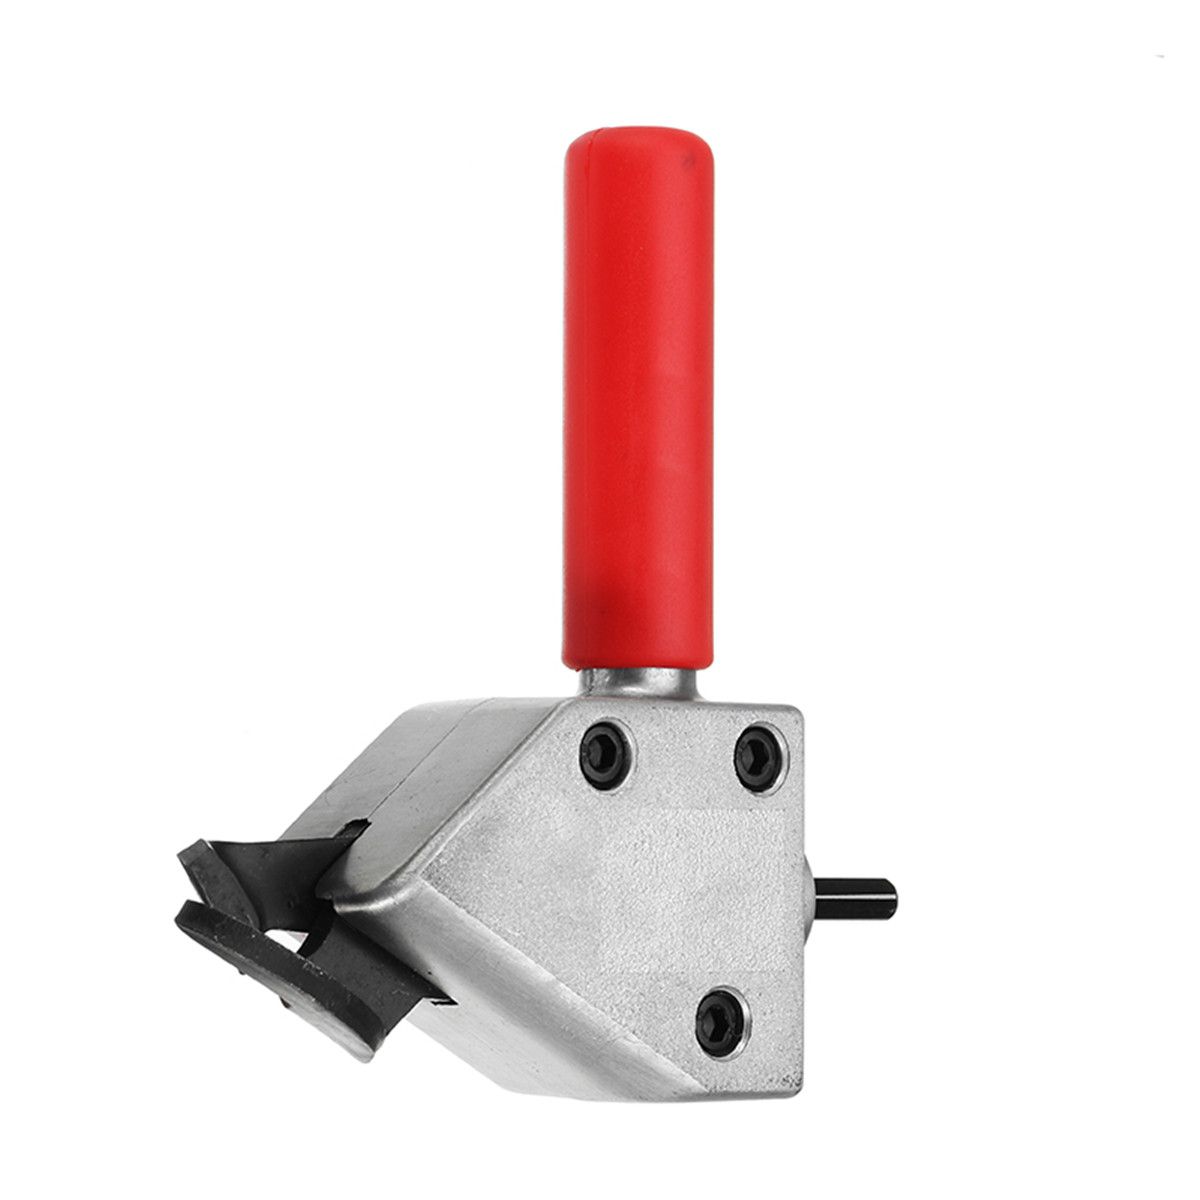 Metal-Sheet-Cutter-Adapter-Iron-Wire-Netting-Nibbler-Cutter-For-Electric-Drill-1328513